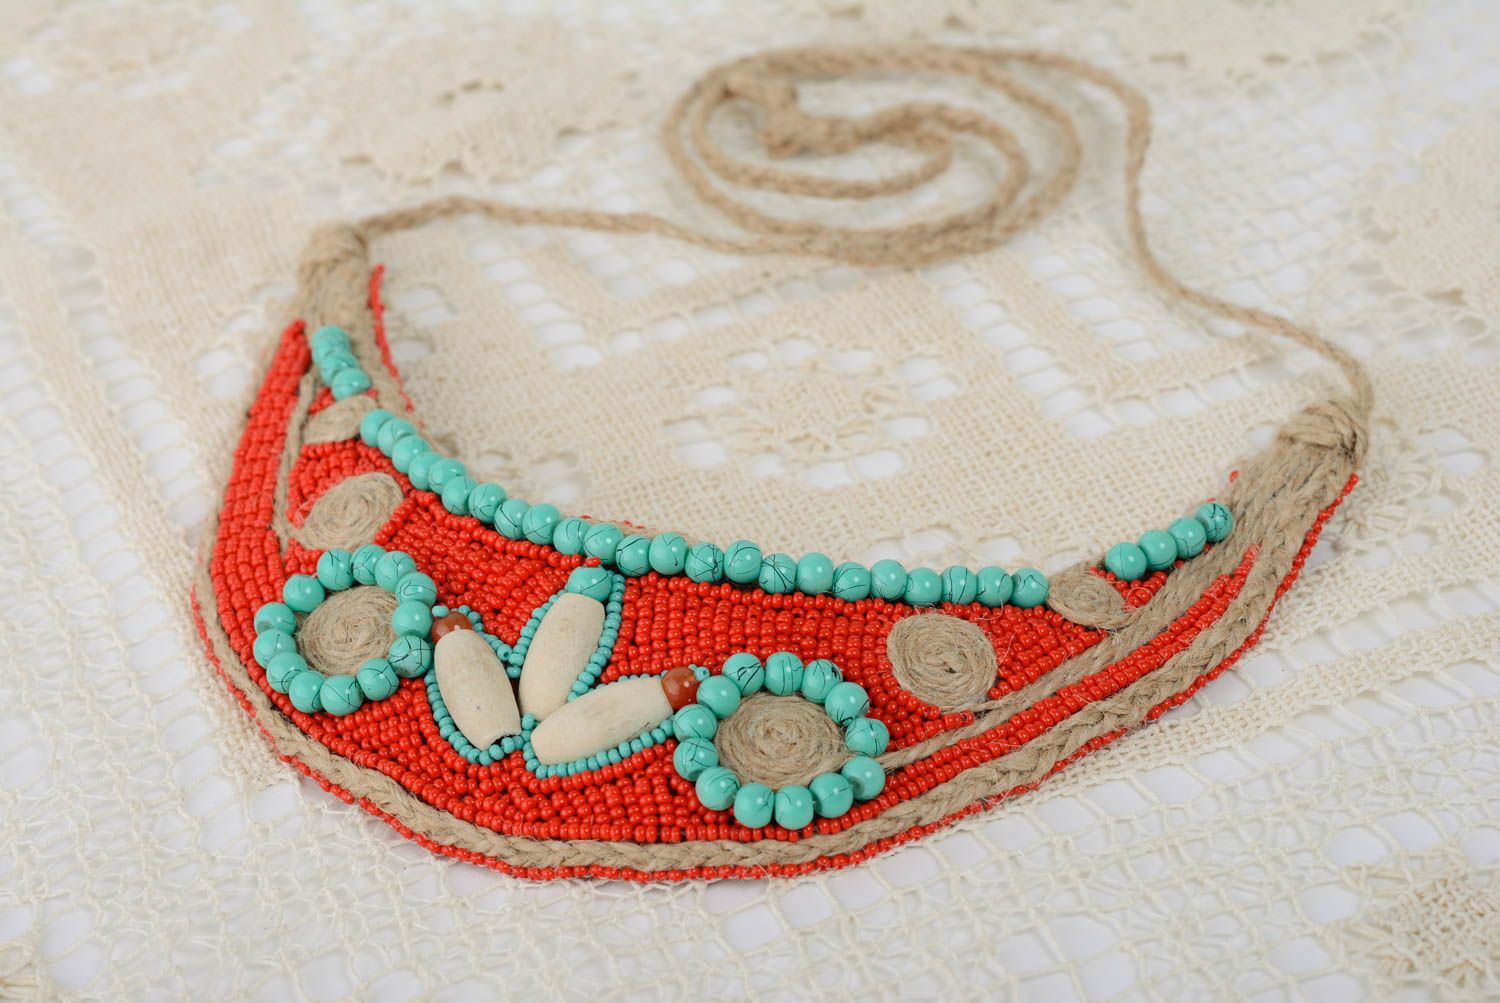 Handmade bead embroidered necklace with natural stones in turquoise and red colors photo 1